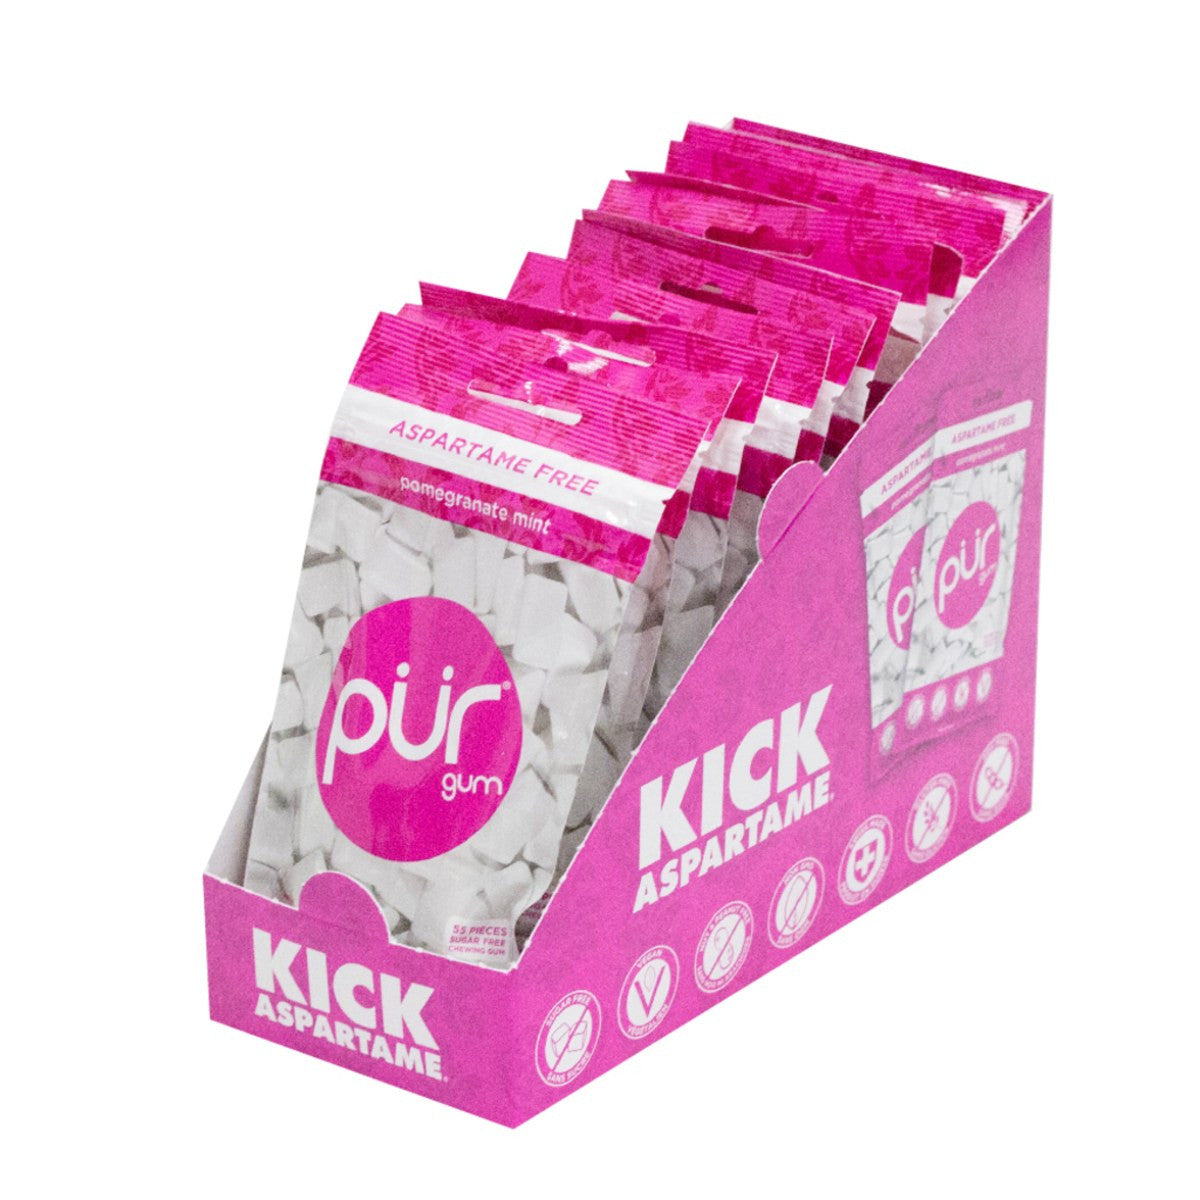 PUR Pomegranate Mint Gum Single Bag 77g Or A Box Of 12, Aspartame Free & Gluten Free {Resealable Bag}